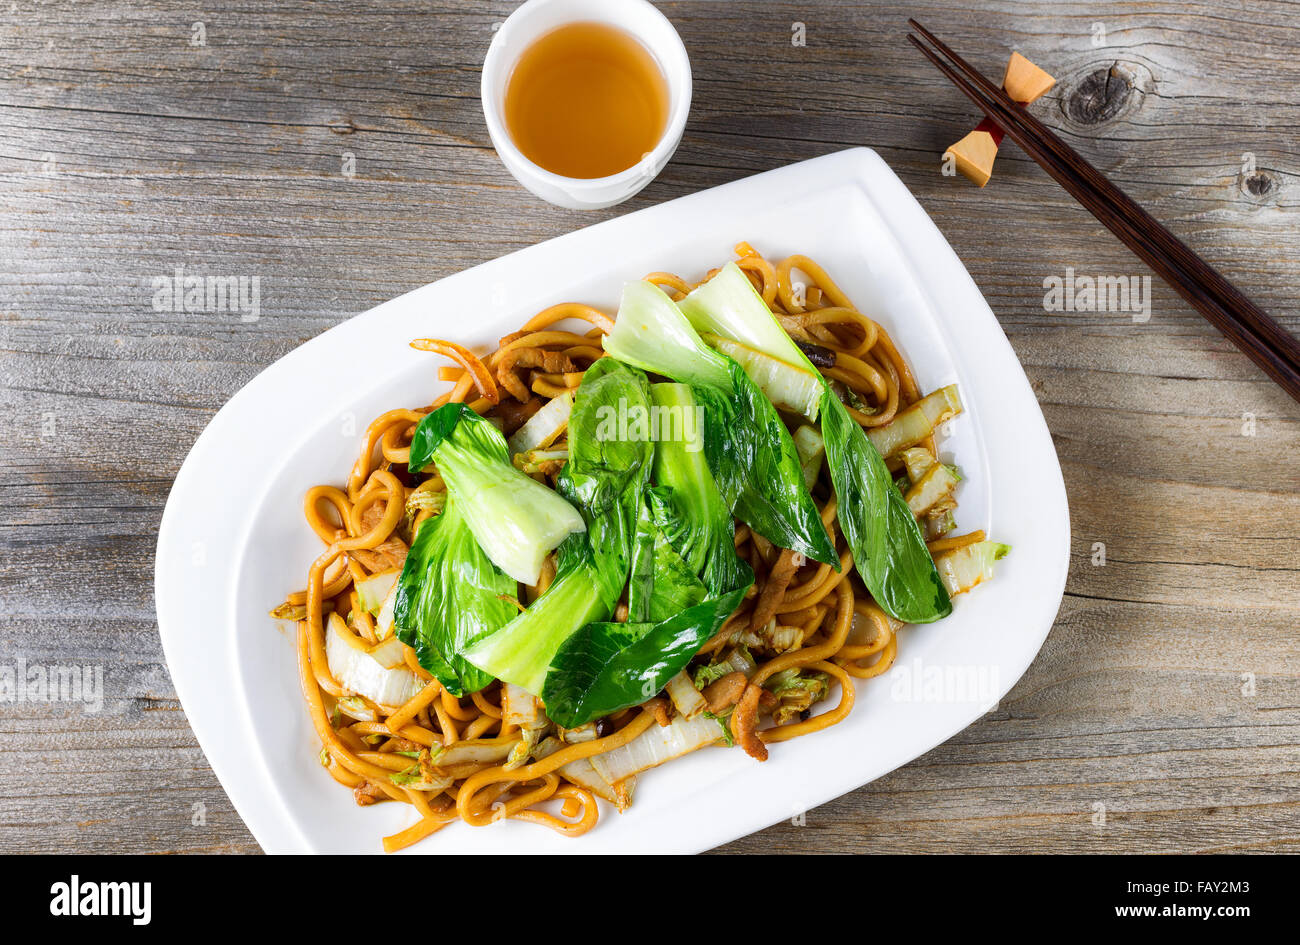 High angled view of spicy cooked noodles, onion, bok choy, chicken slices, chopsticks and tea on rustic wood. Stock Photo